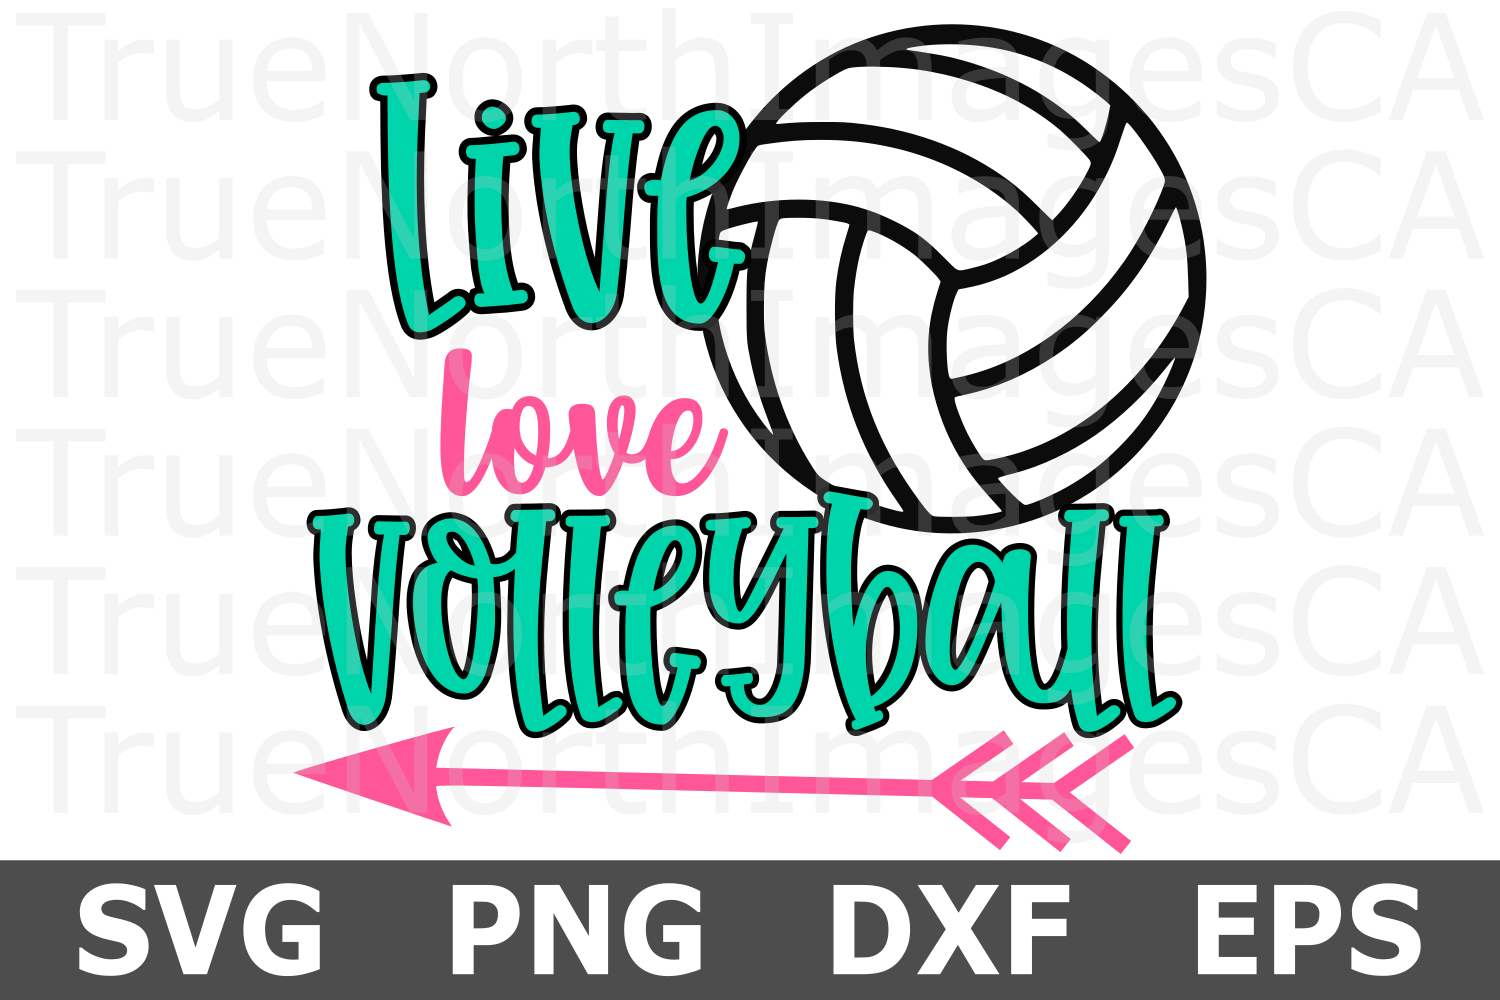 Download Live Love Volleyball - A Sports SVG Cut File